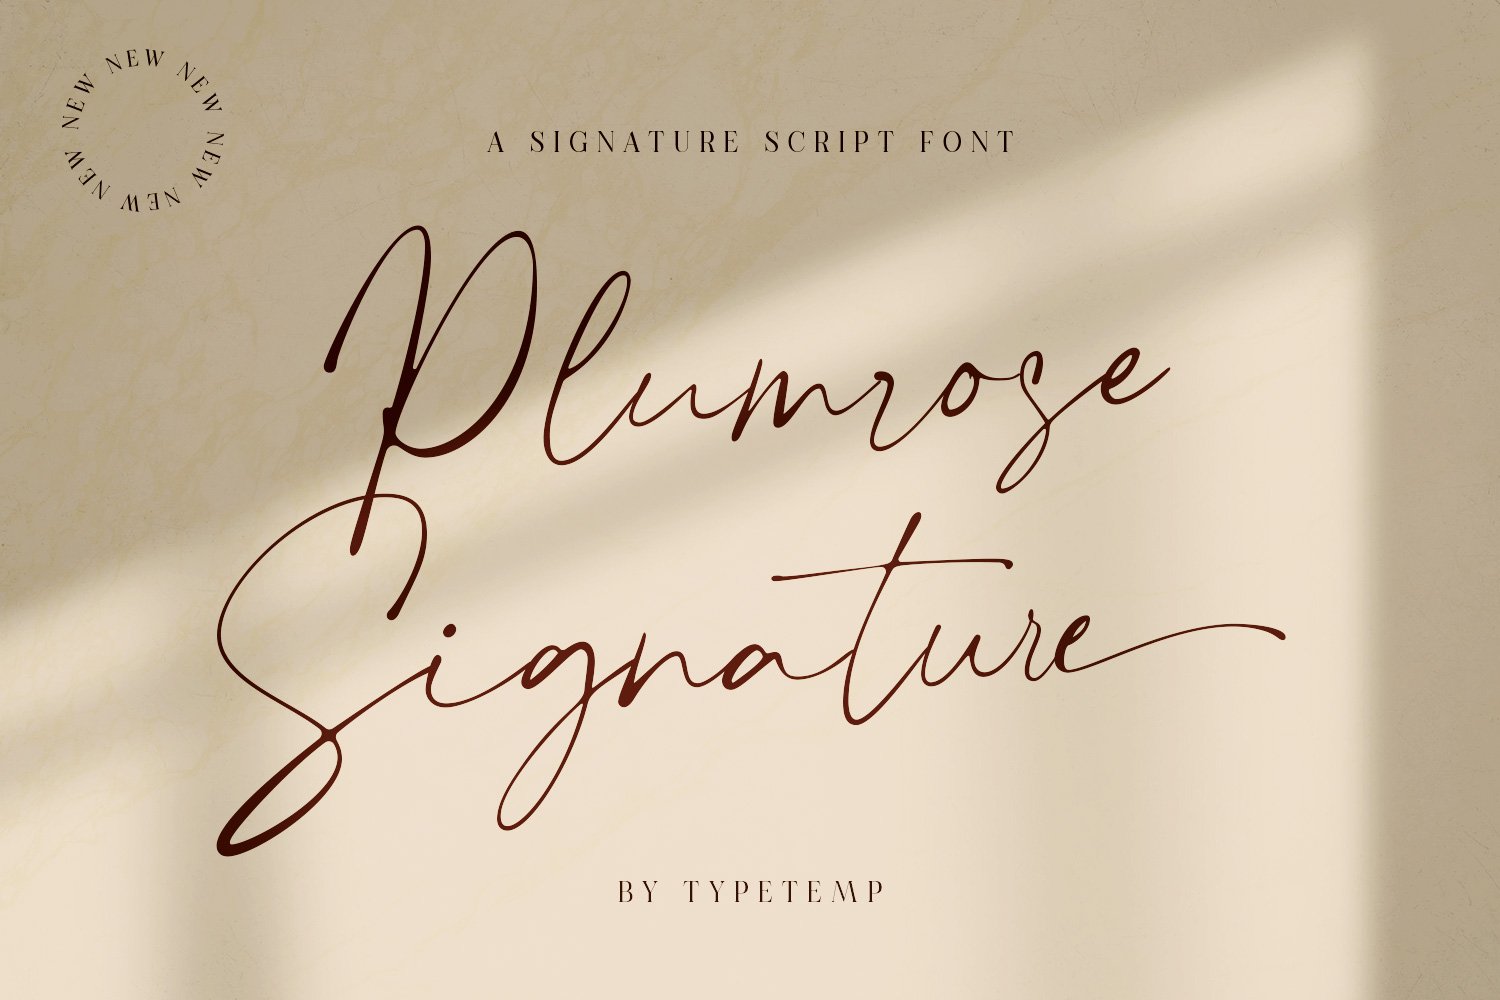 Plumrose is a signature script font and can add a chic and elegant touch to your designs. 